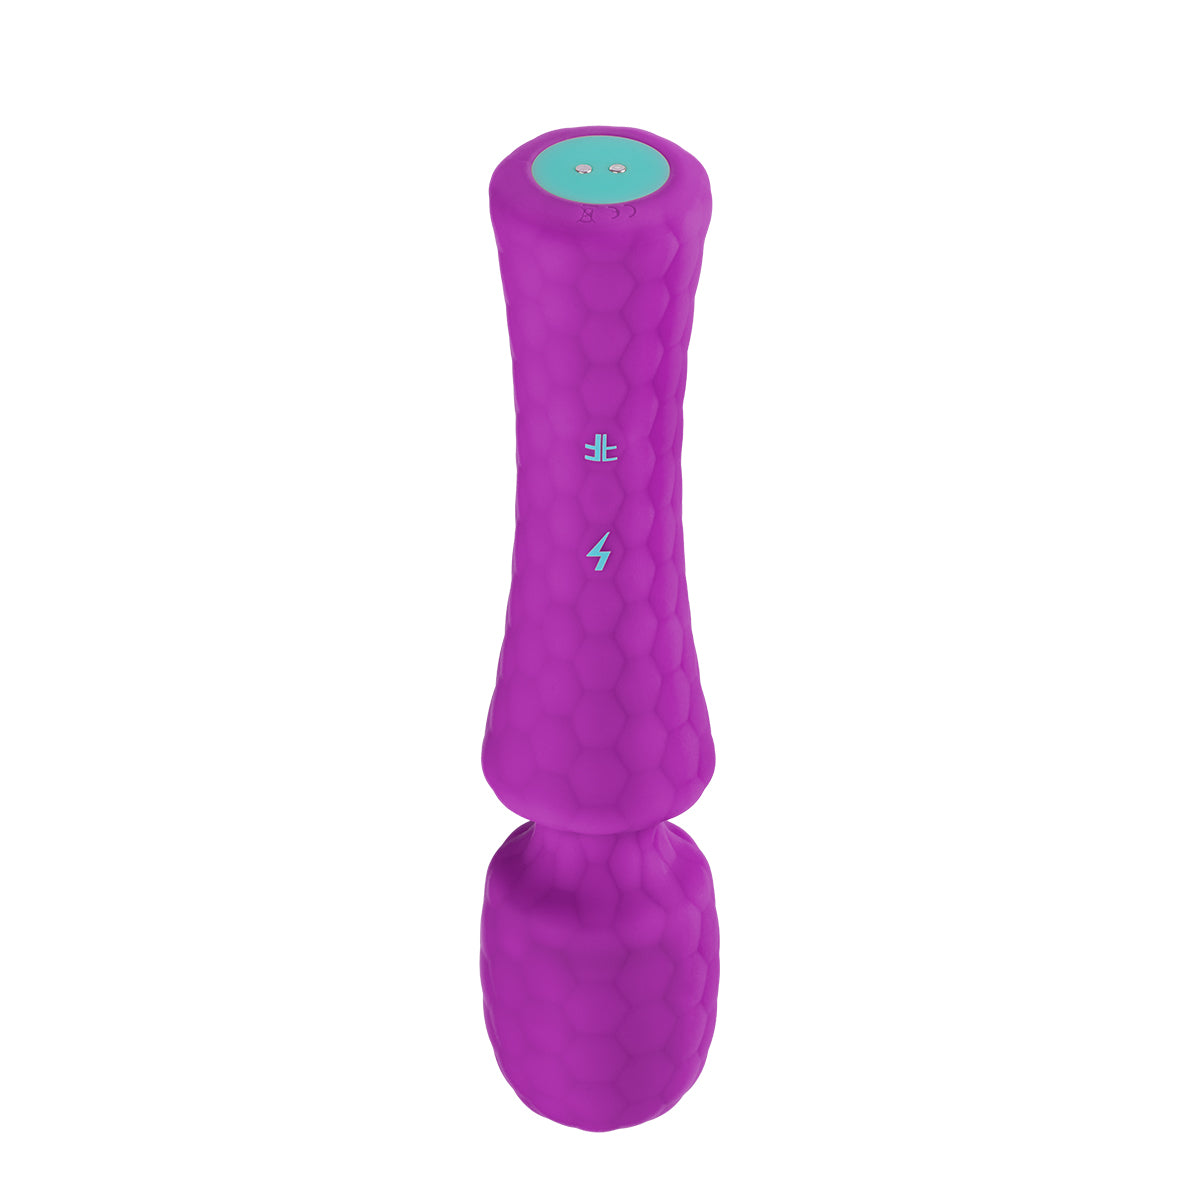 Femme Funn Ultra Wand Purple Intimates Adult Boutique